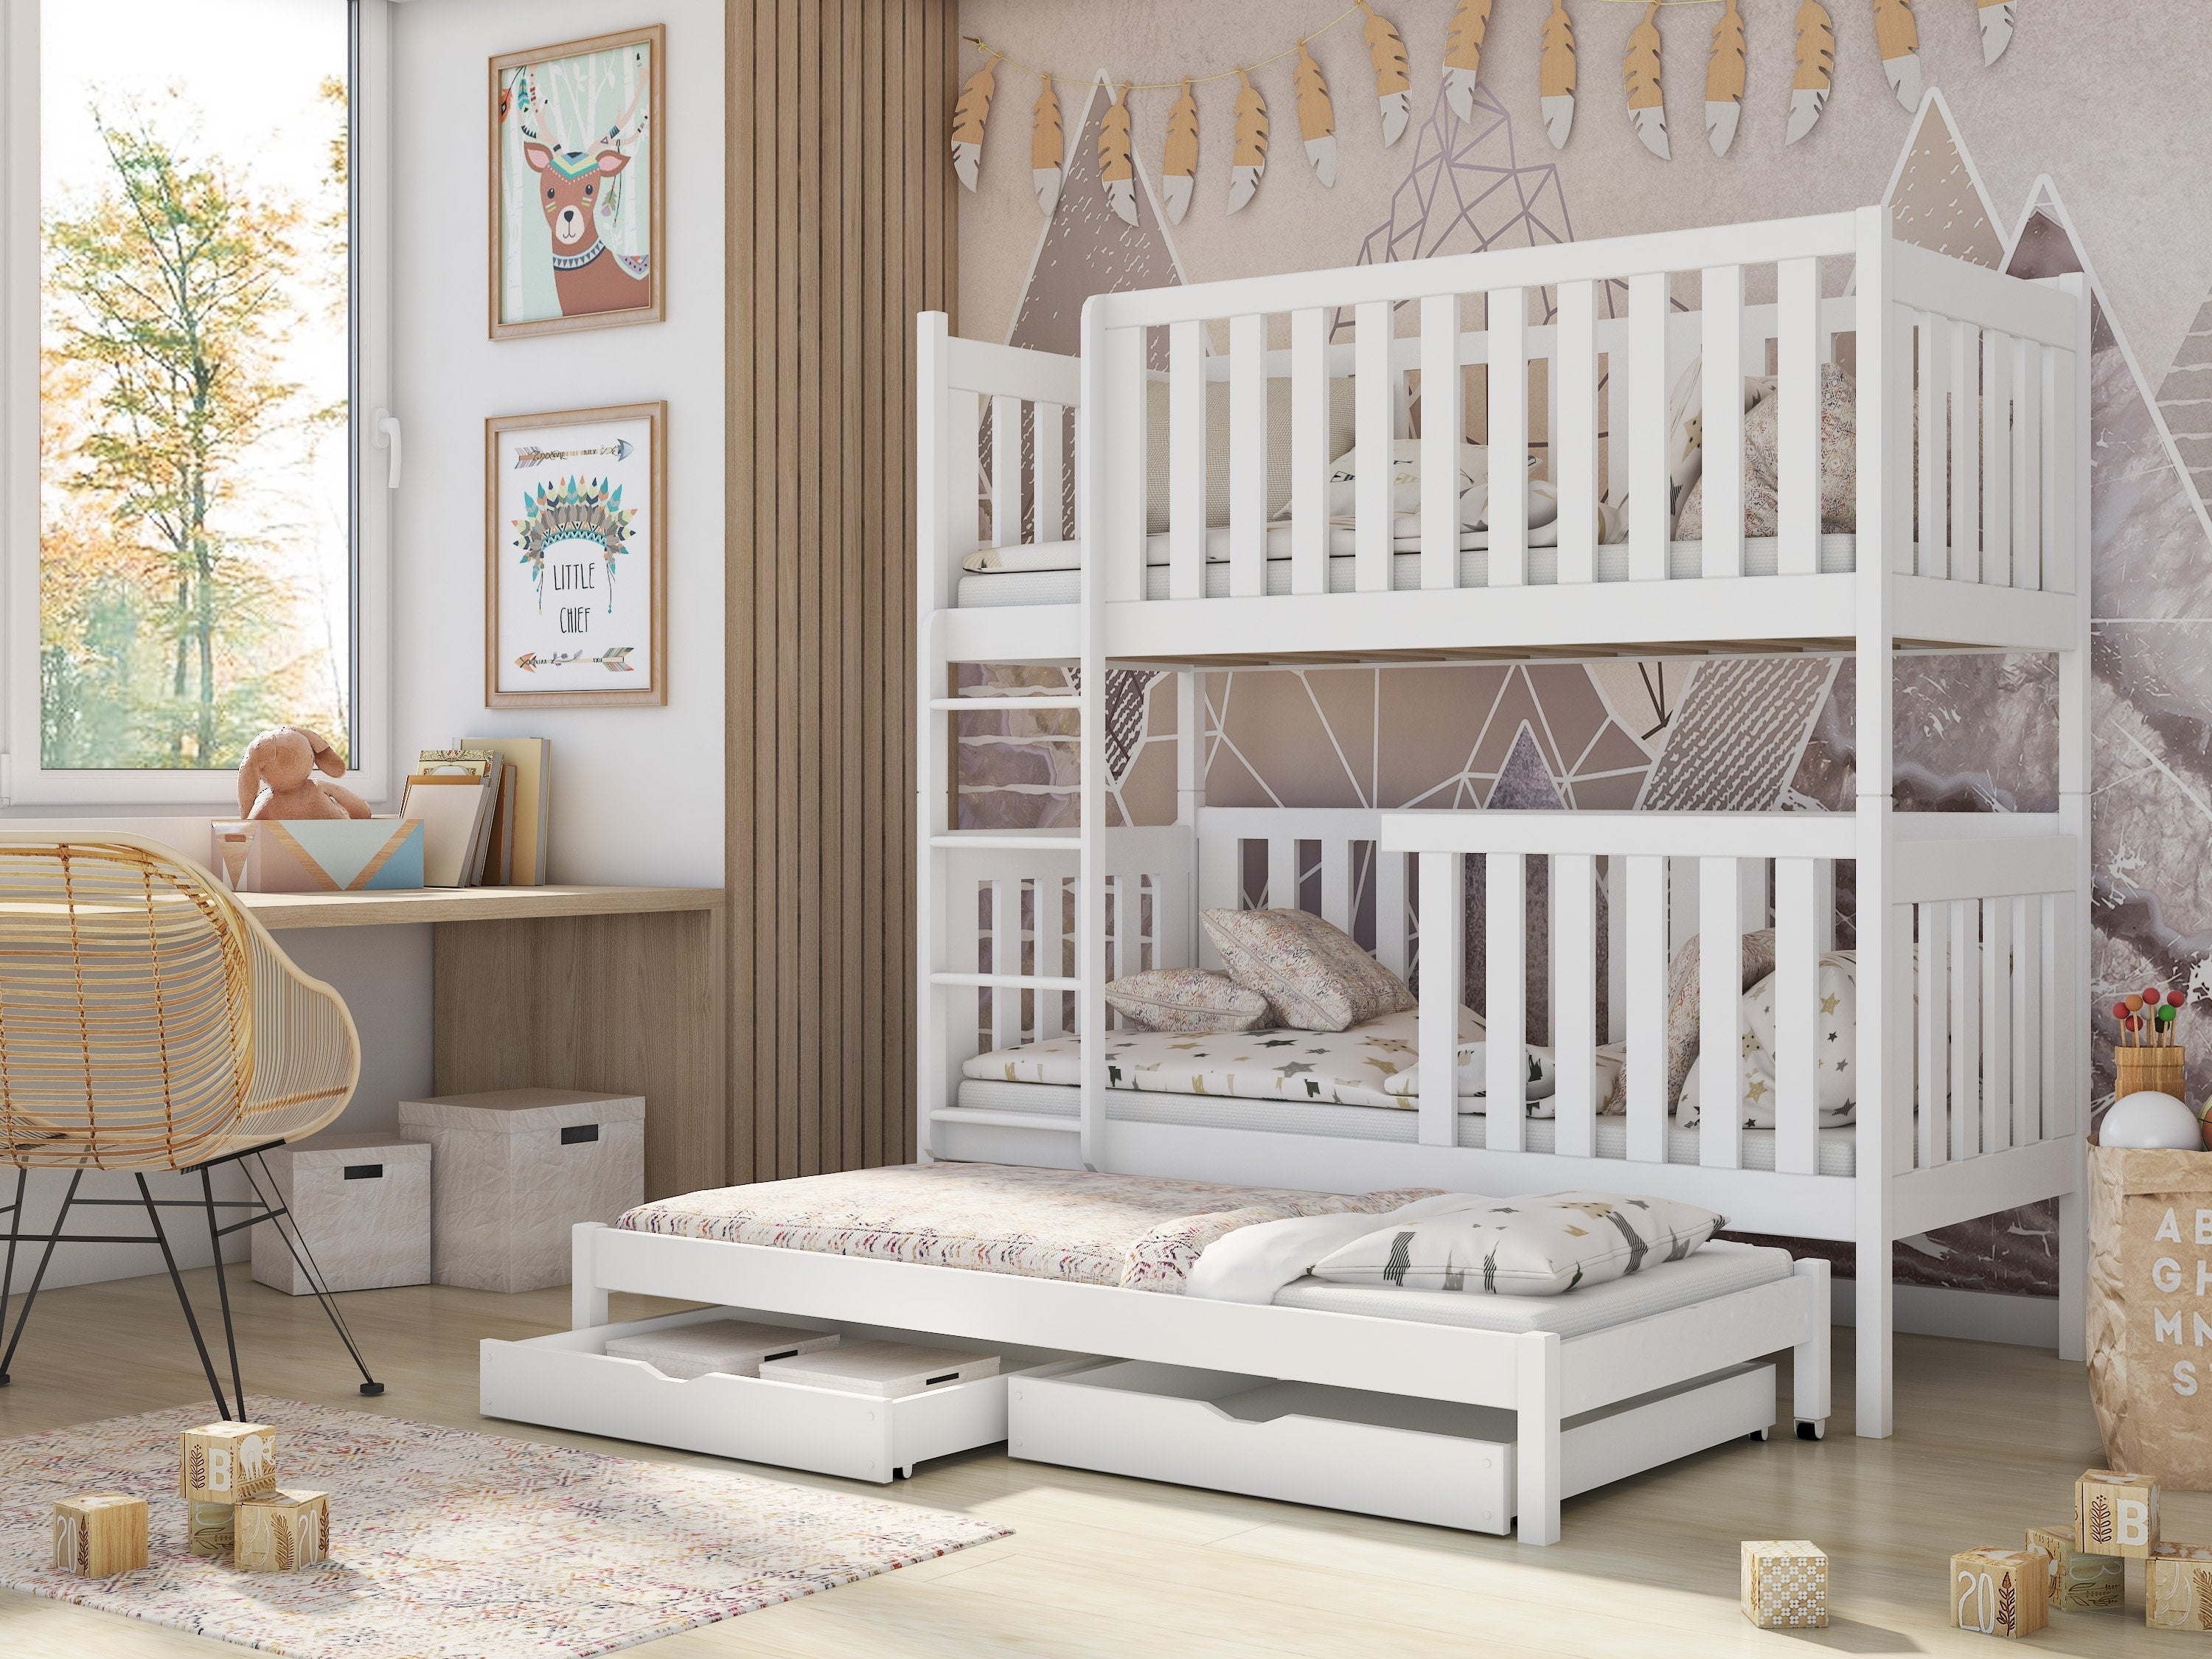 View Wooden Bunk Bed Emily with Trundle and Storage White Matt Foam Mattresses information